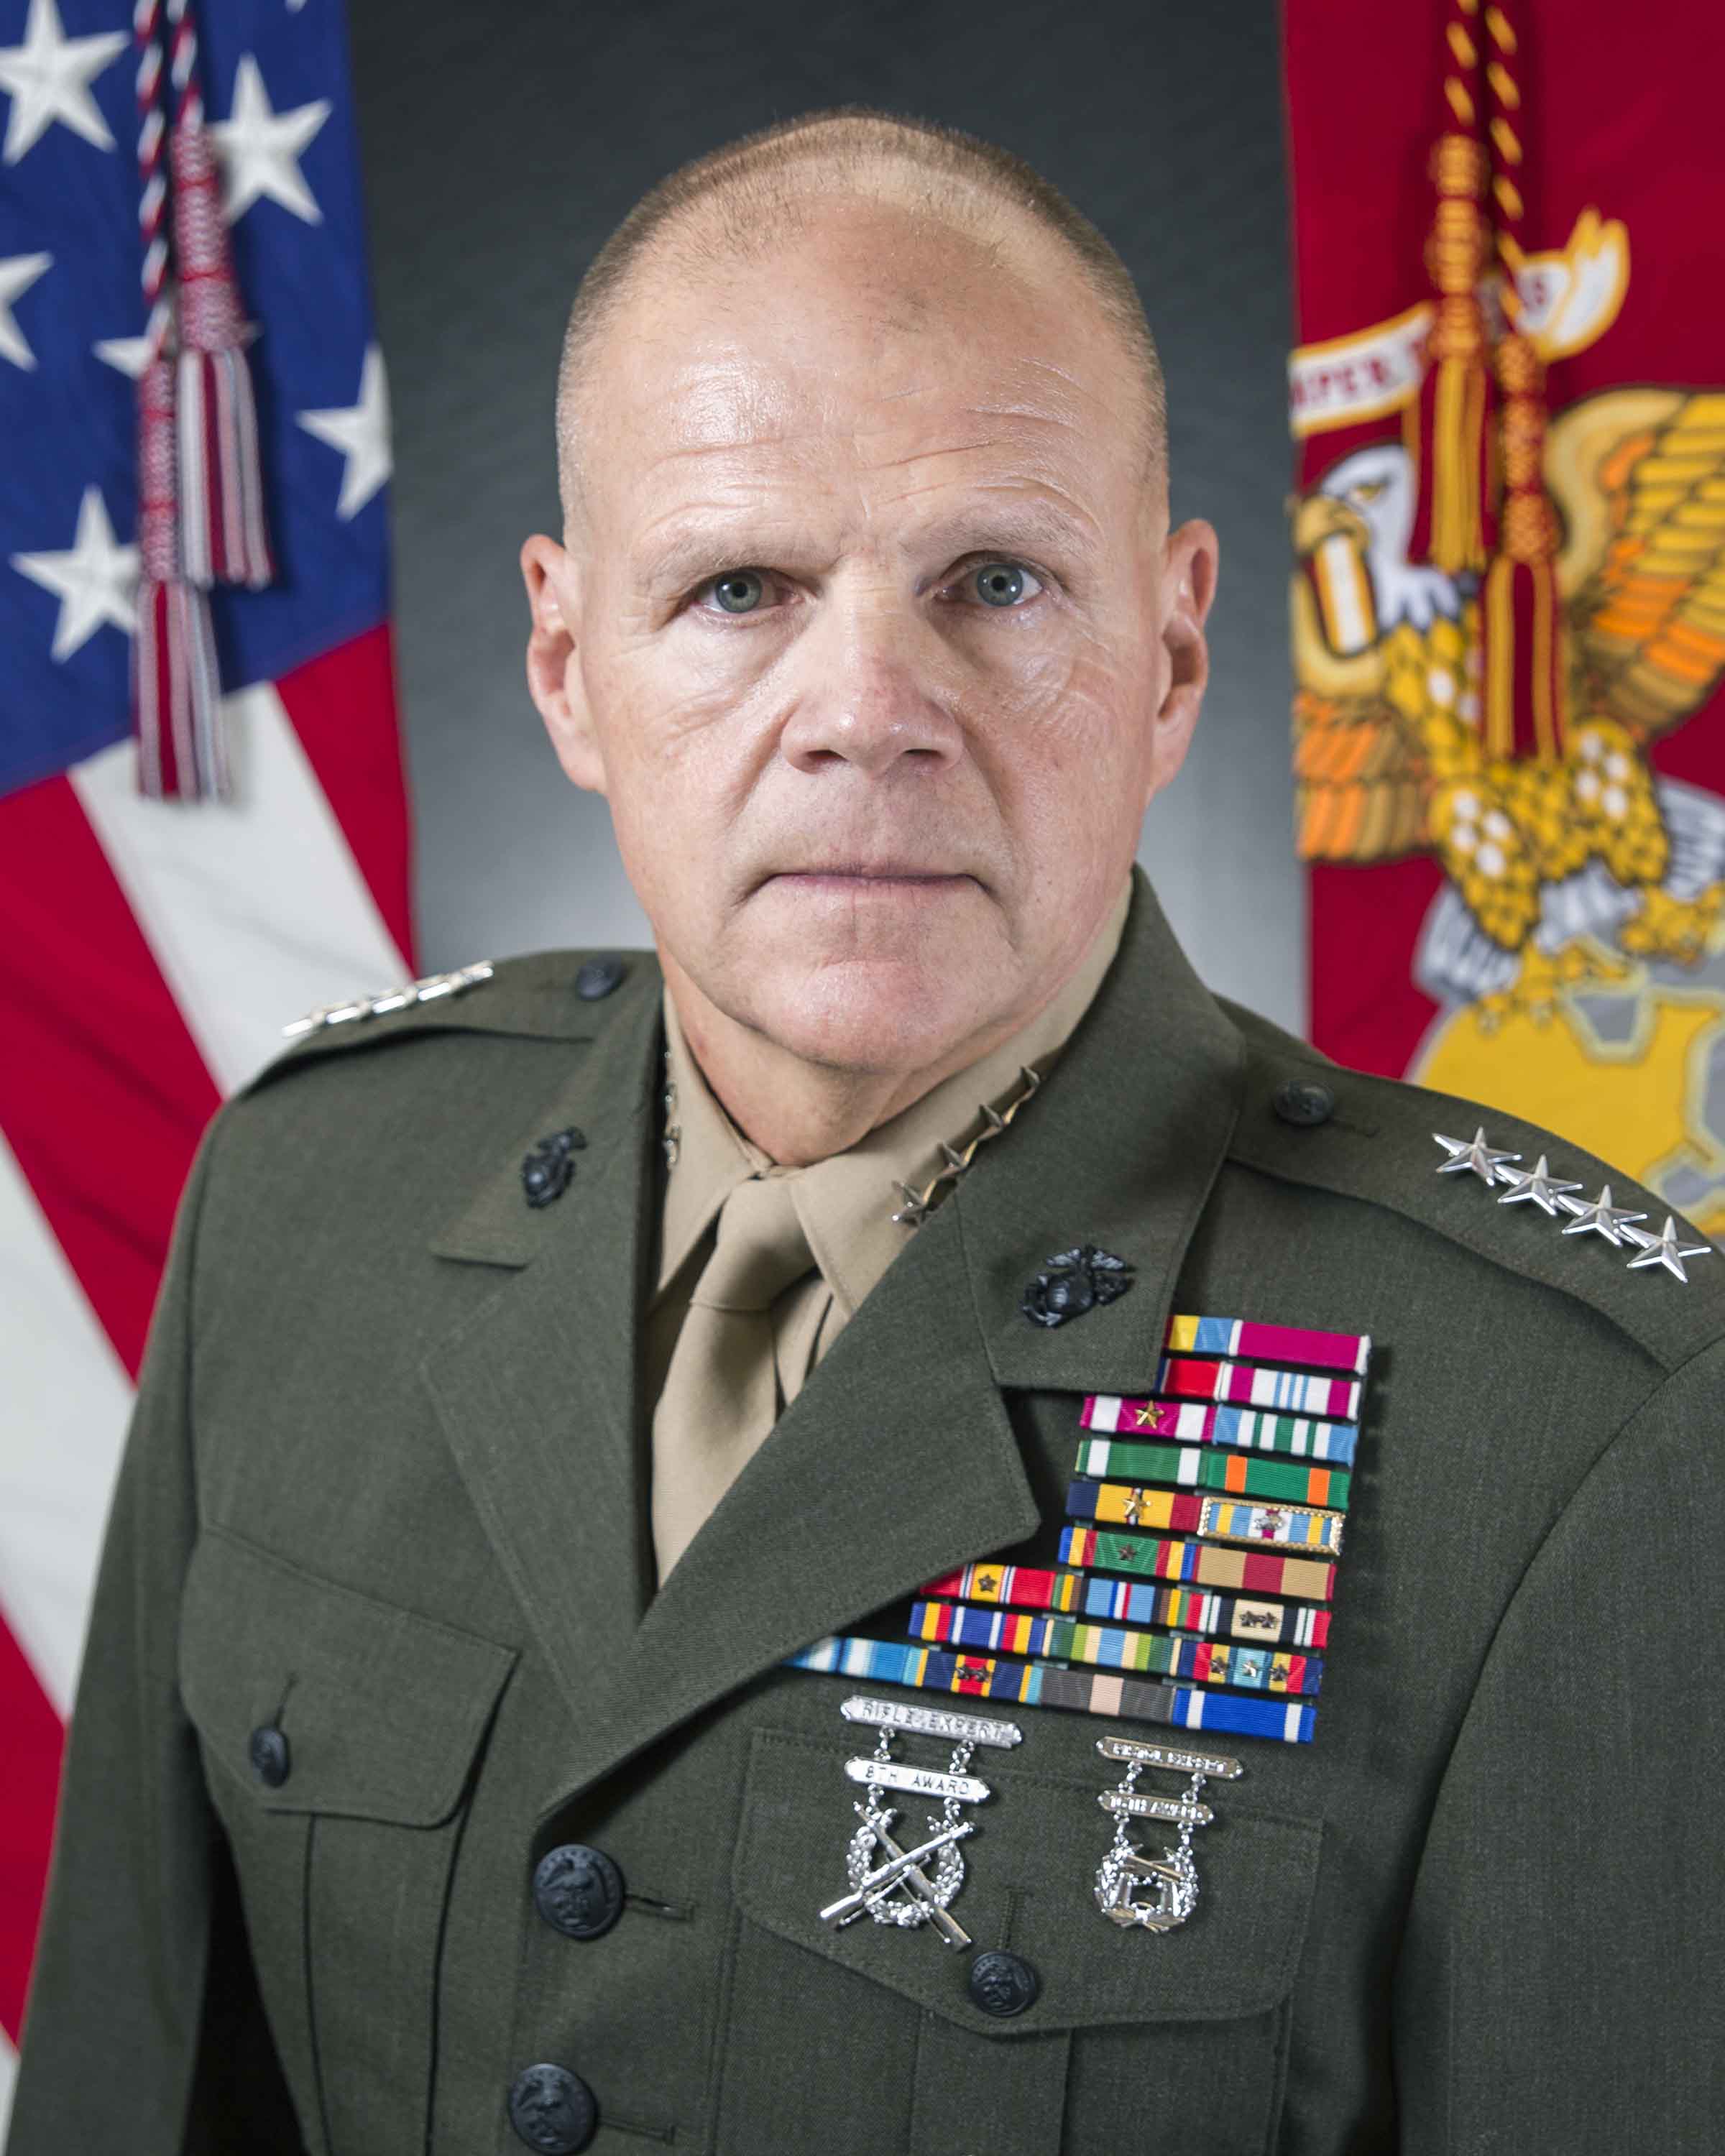 Four-star general gives lessons on leadership